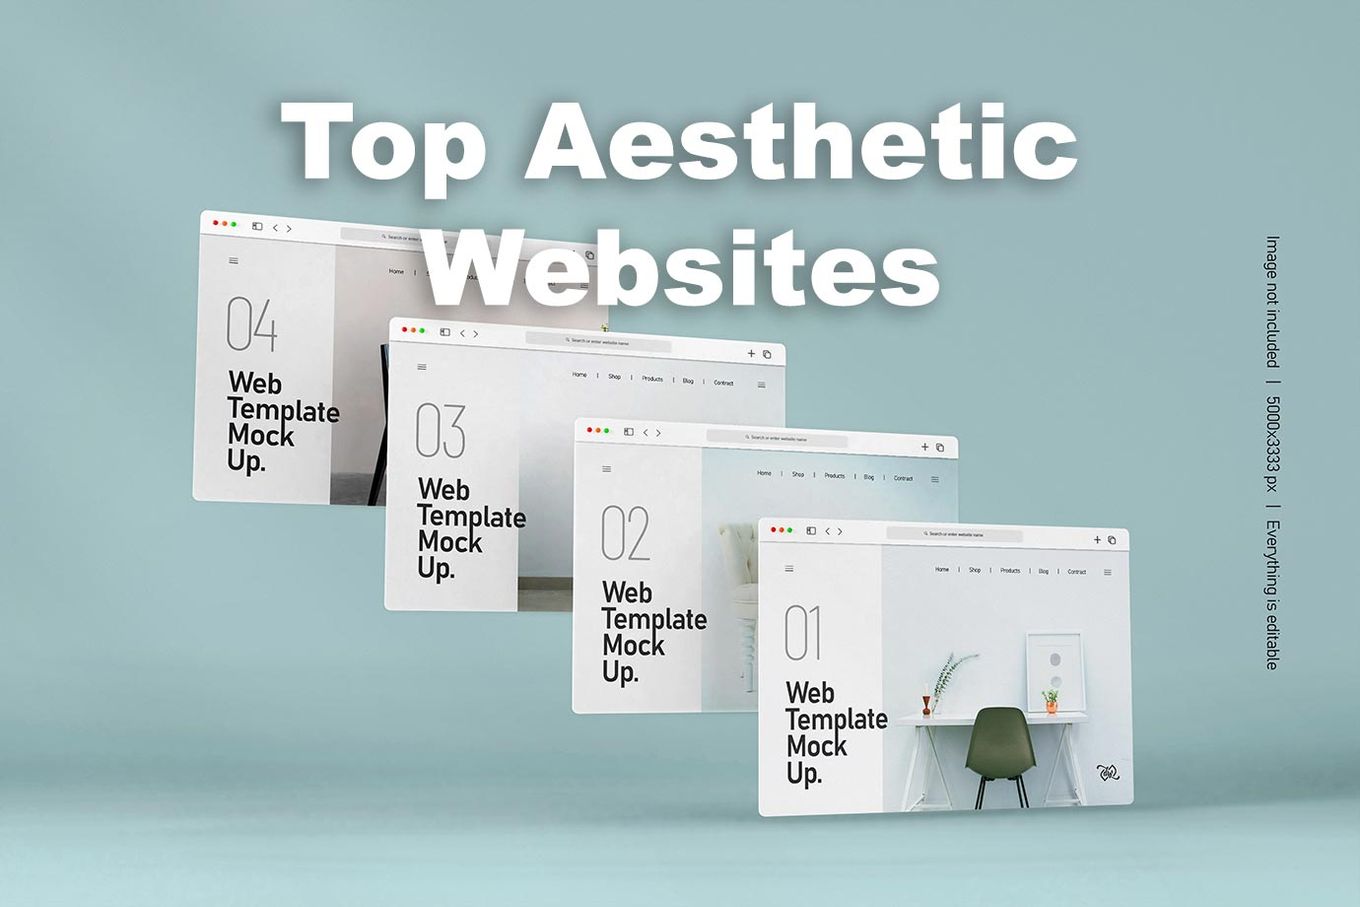 What is aesthetic website?